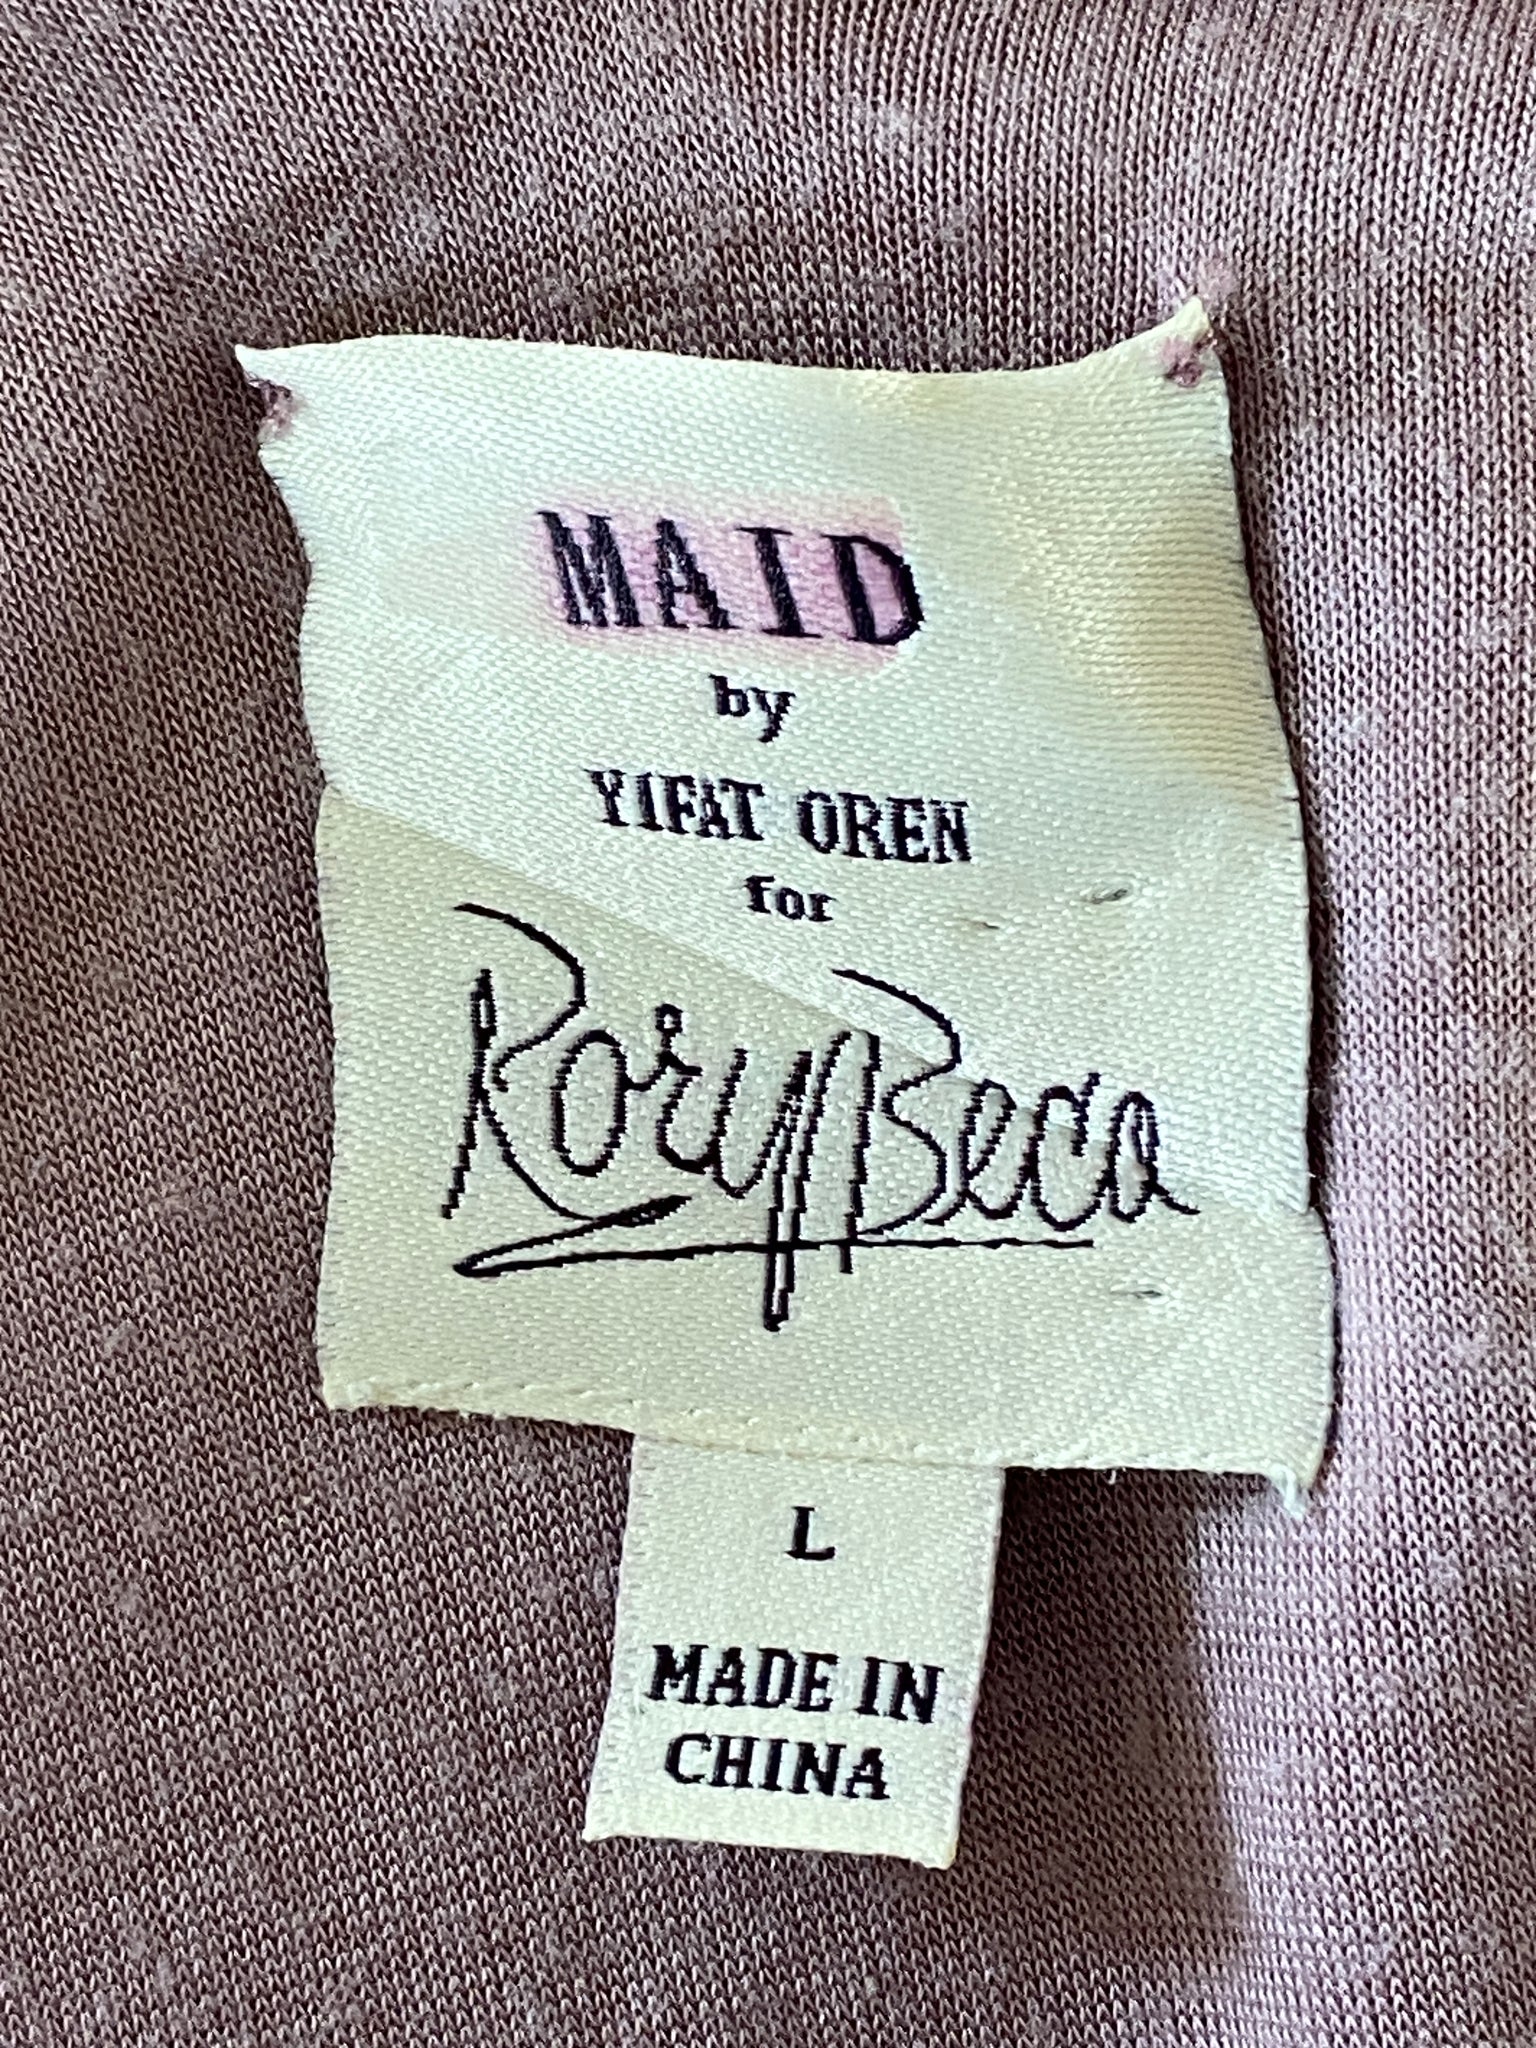 MAID by Yifat Oren for Rory Beca 100% Silk Dress (L)